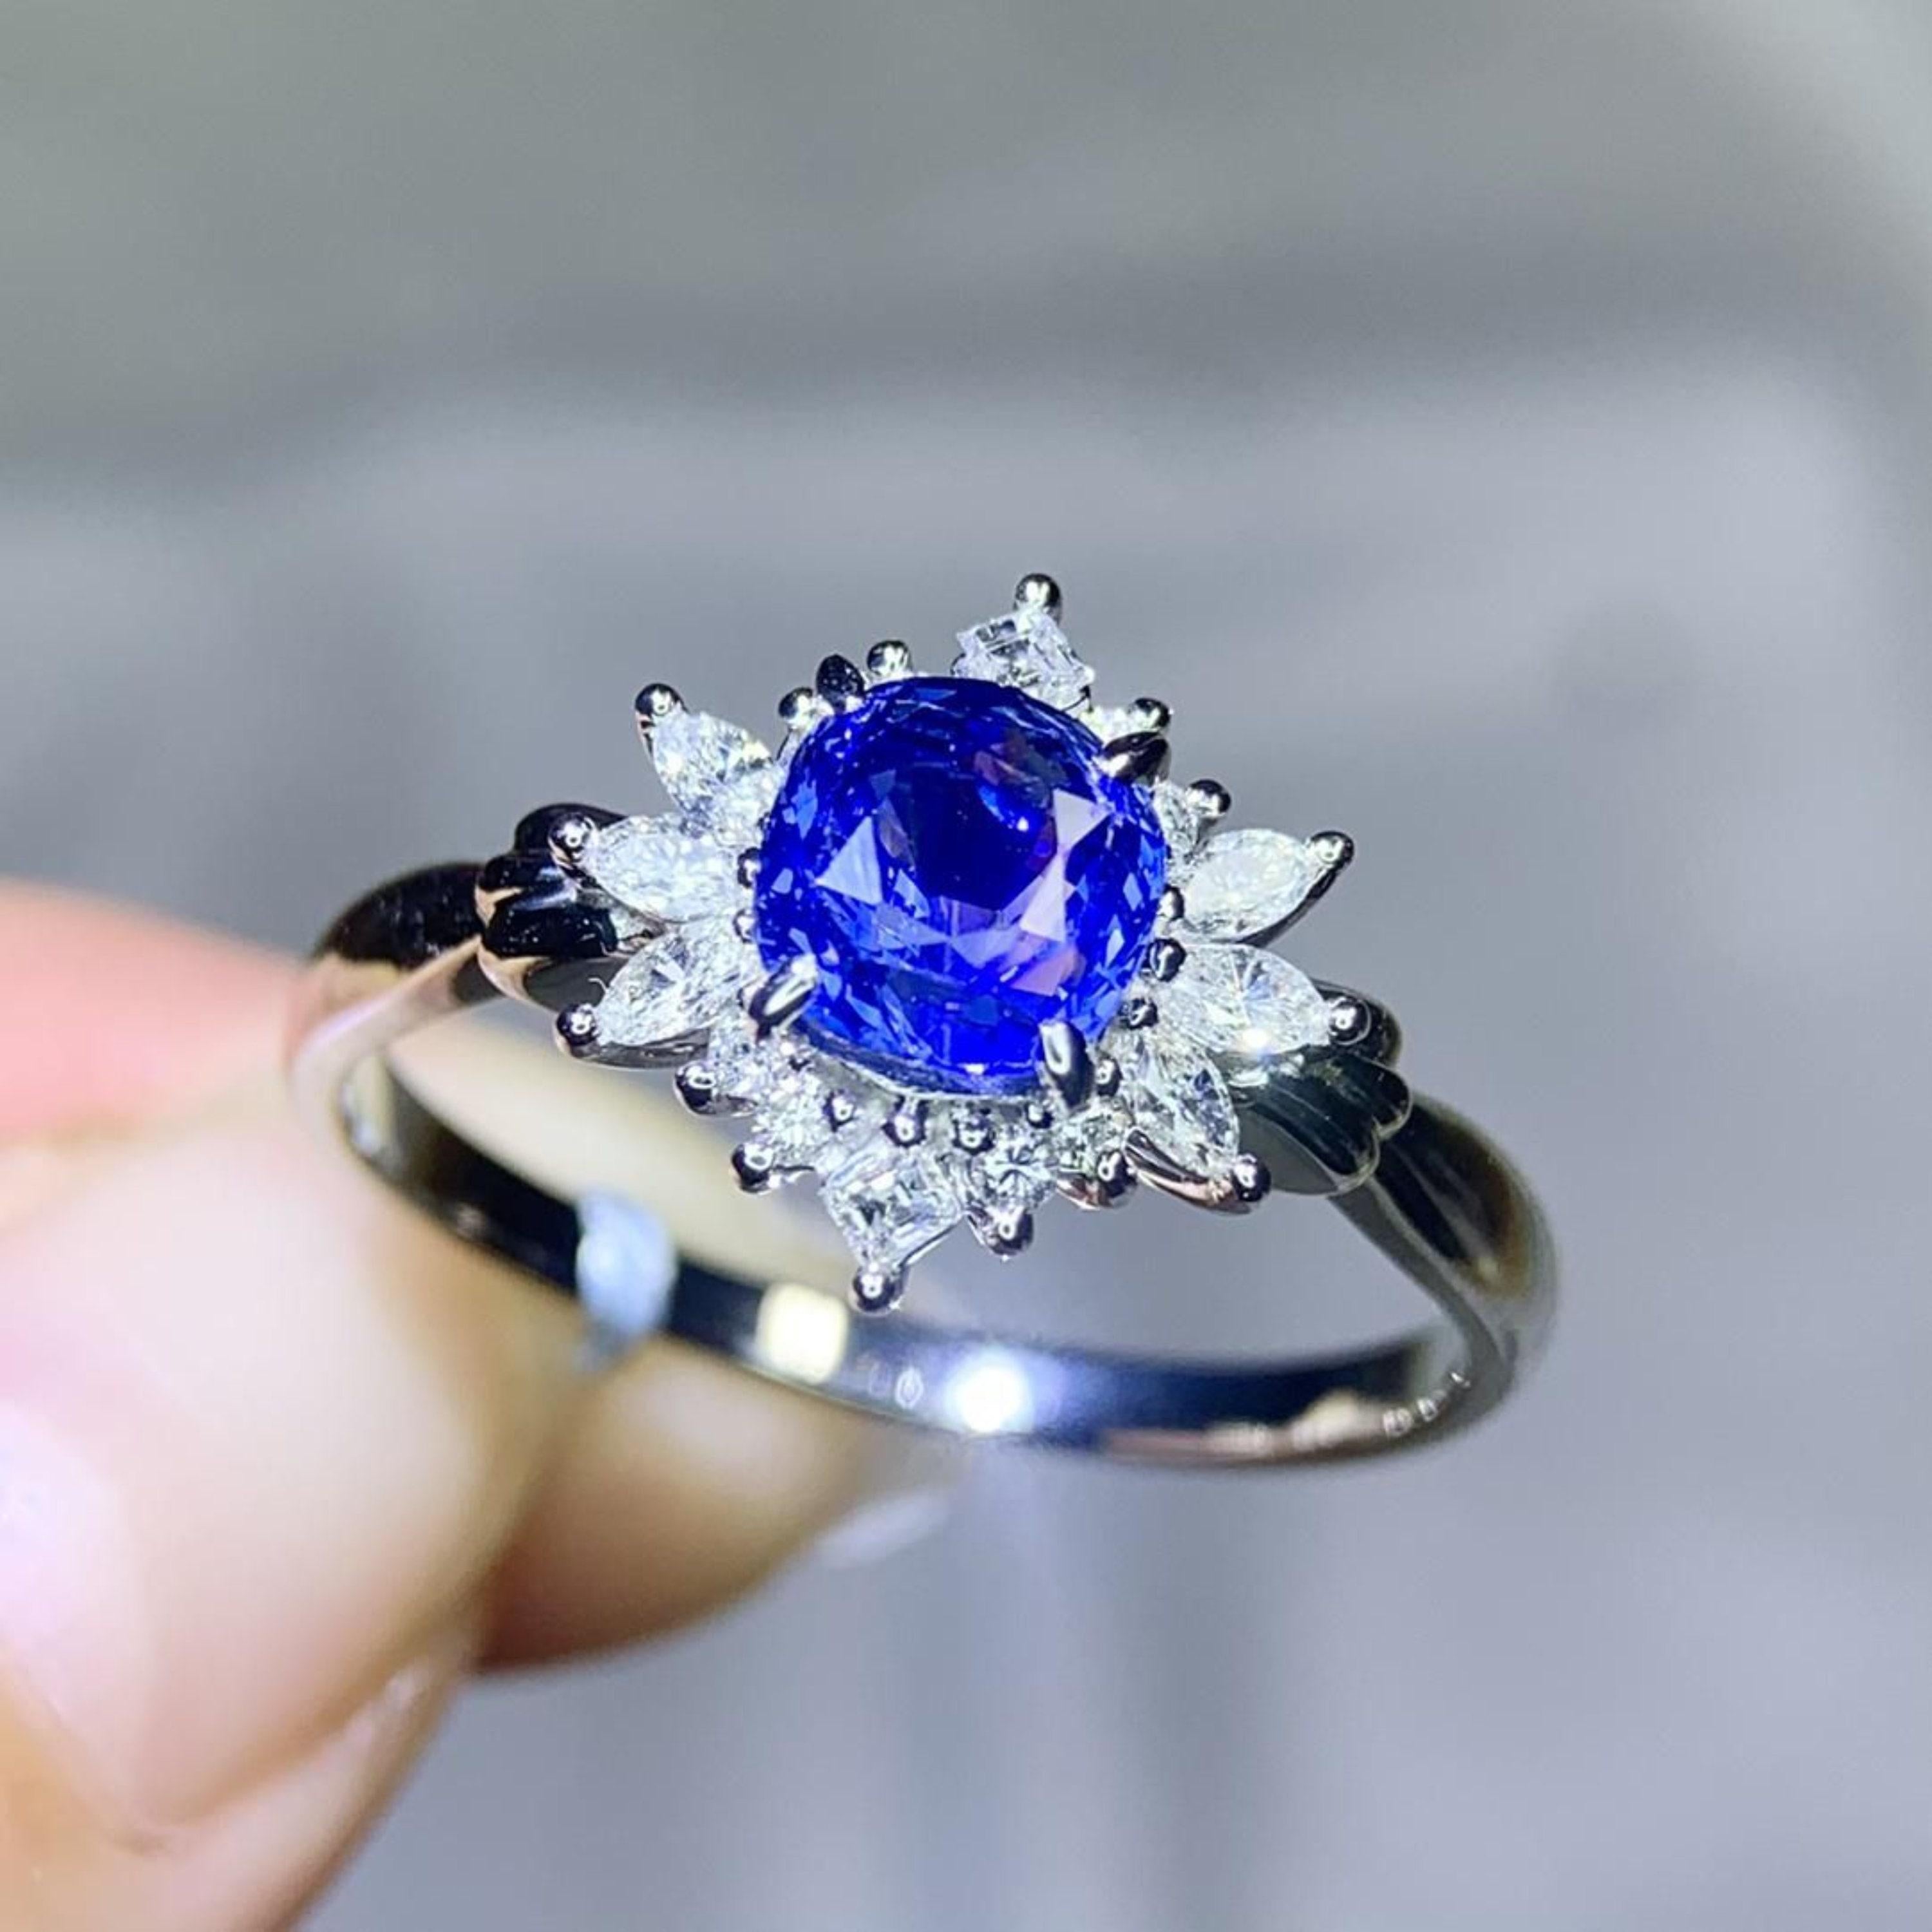 For Sale:  Vintage Sapphire Engagement Ring, Antique Natural Sapphire Wedding Ring 2